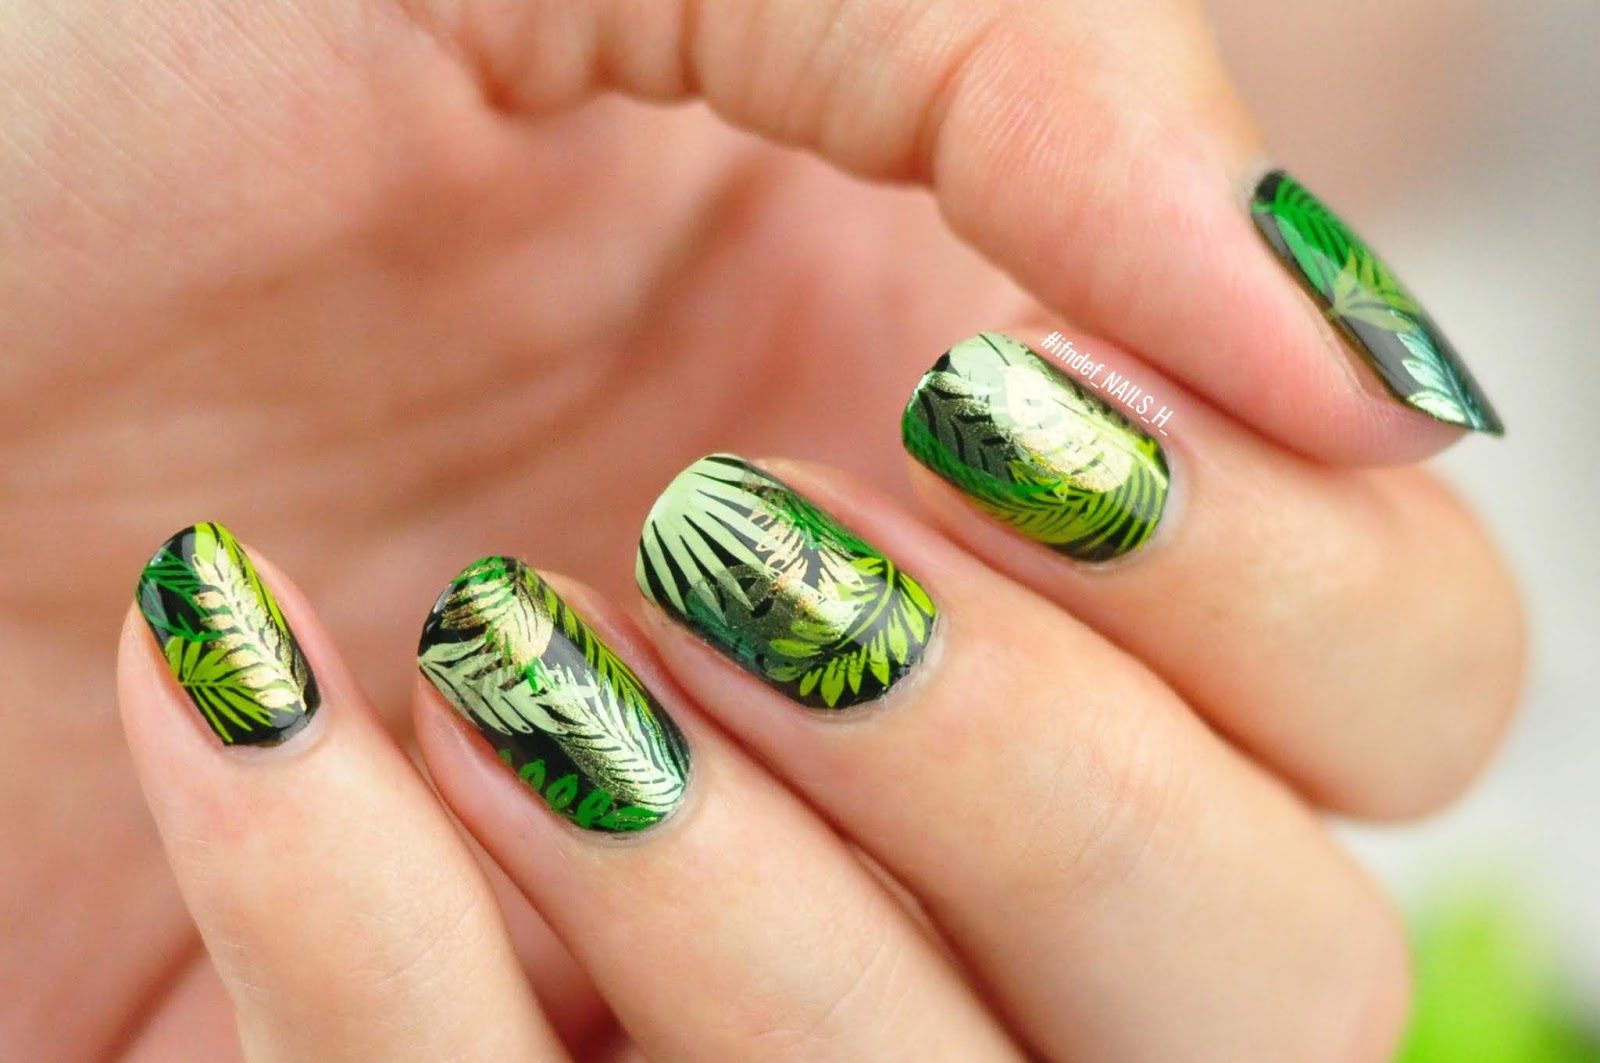 1. Leaf Nail Art Designs for a Chic and Natural Look - wide 4